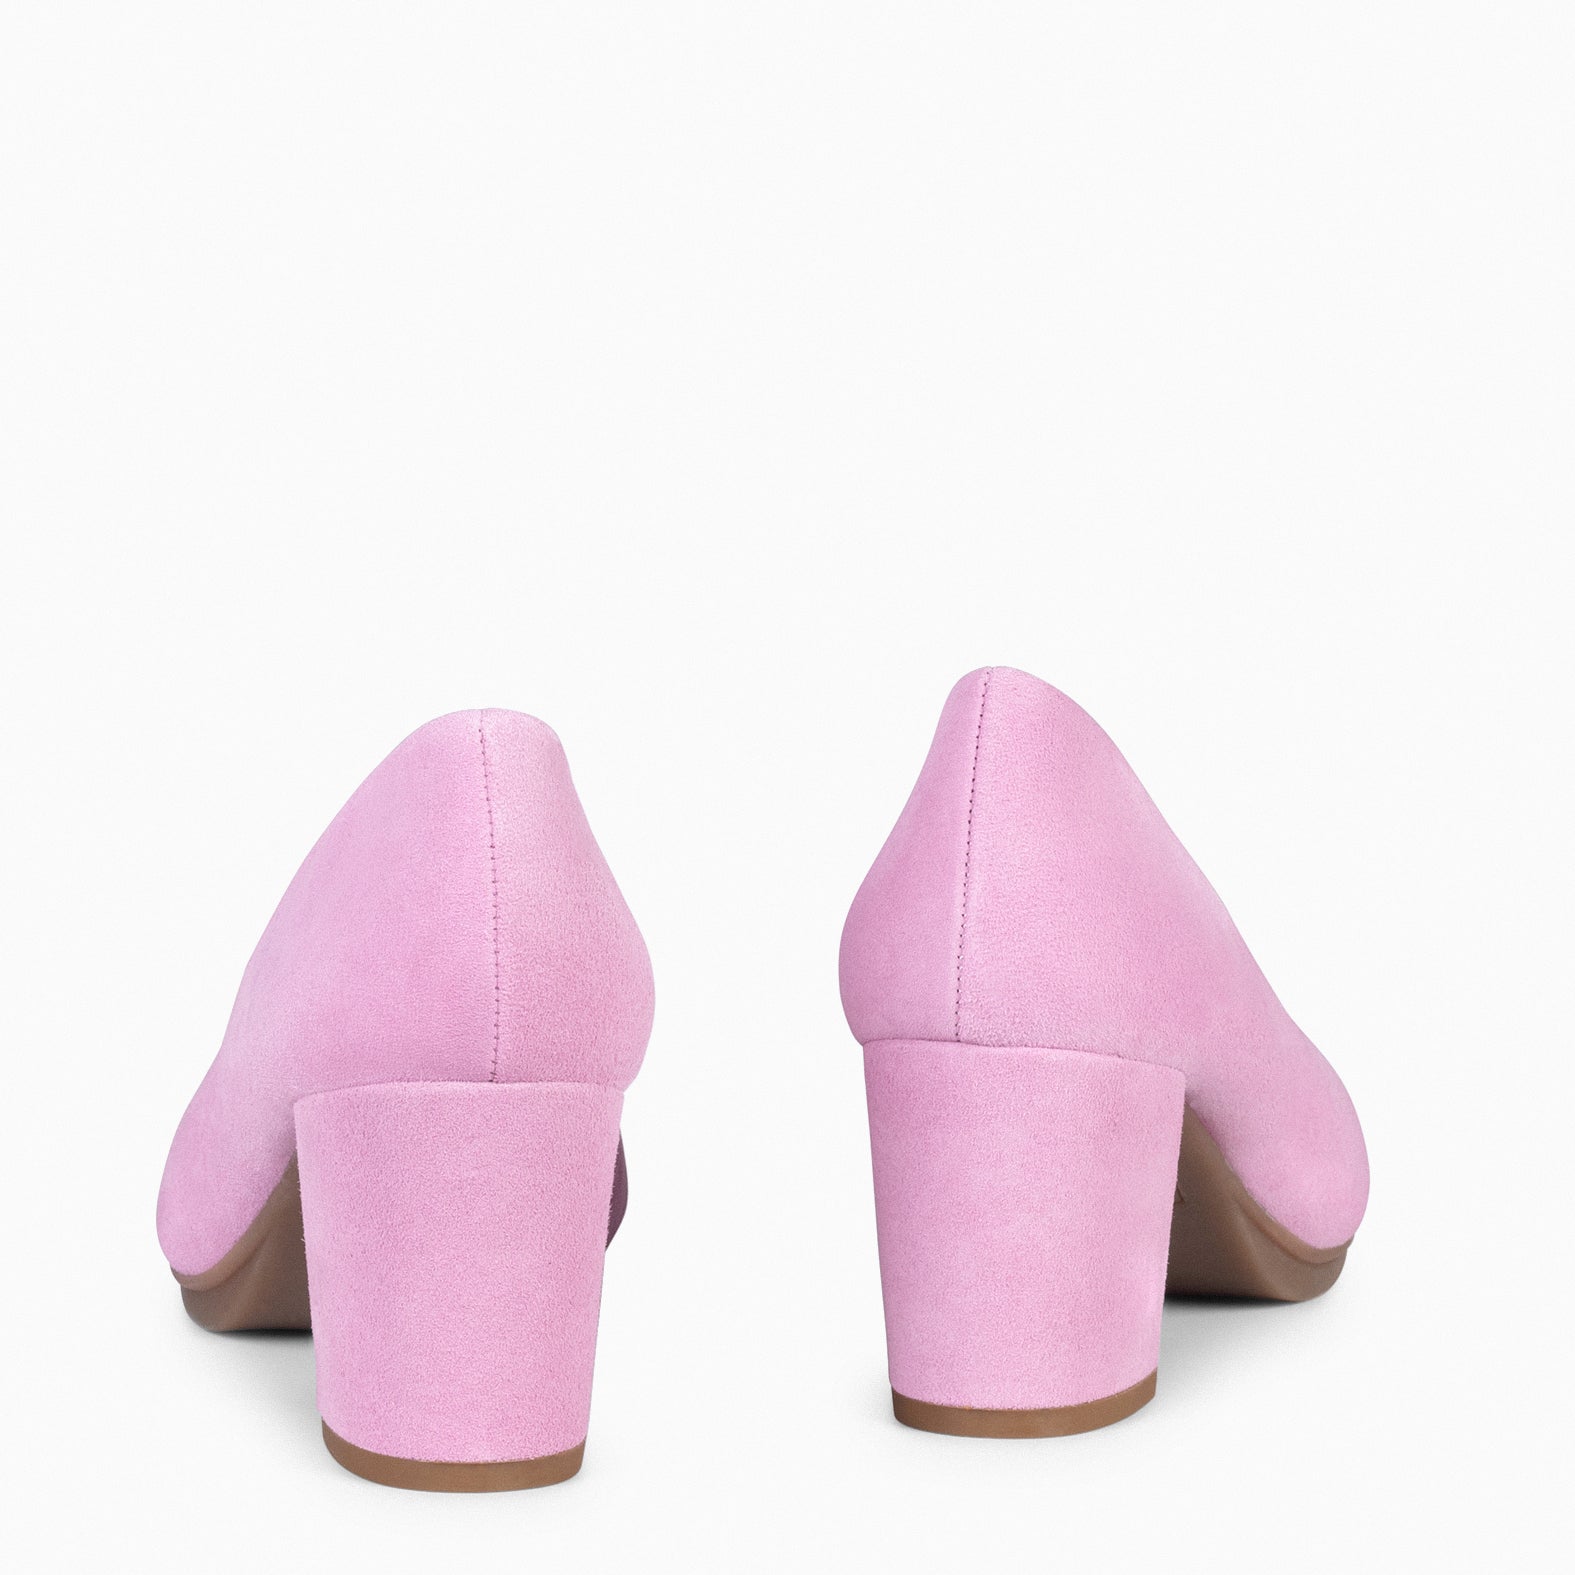 URBAN S – PINK Suede Mid-Heeled Shoes 